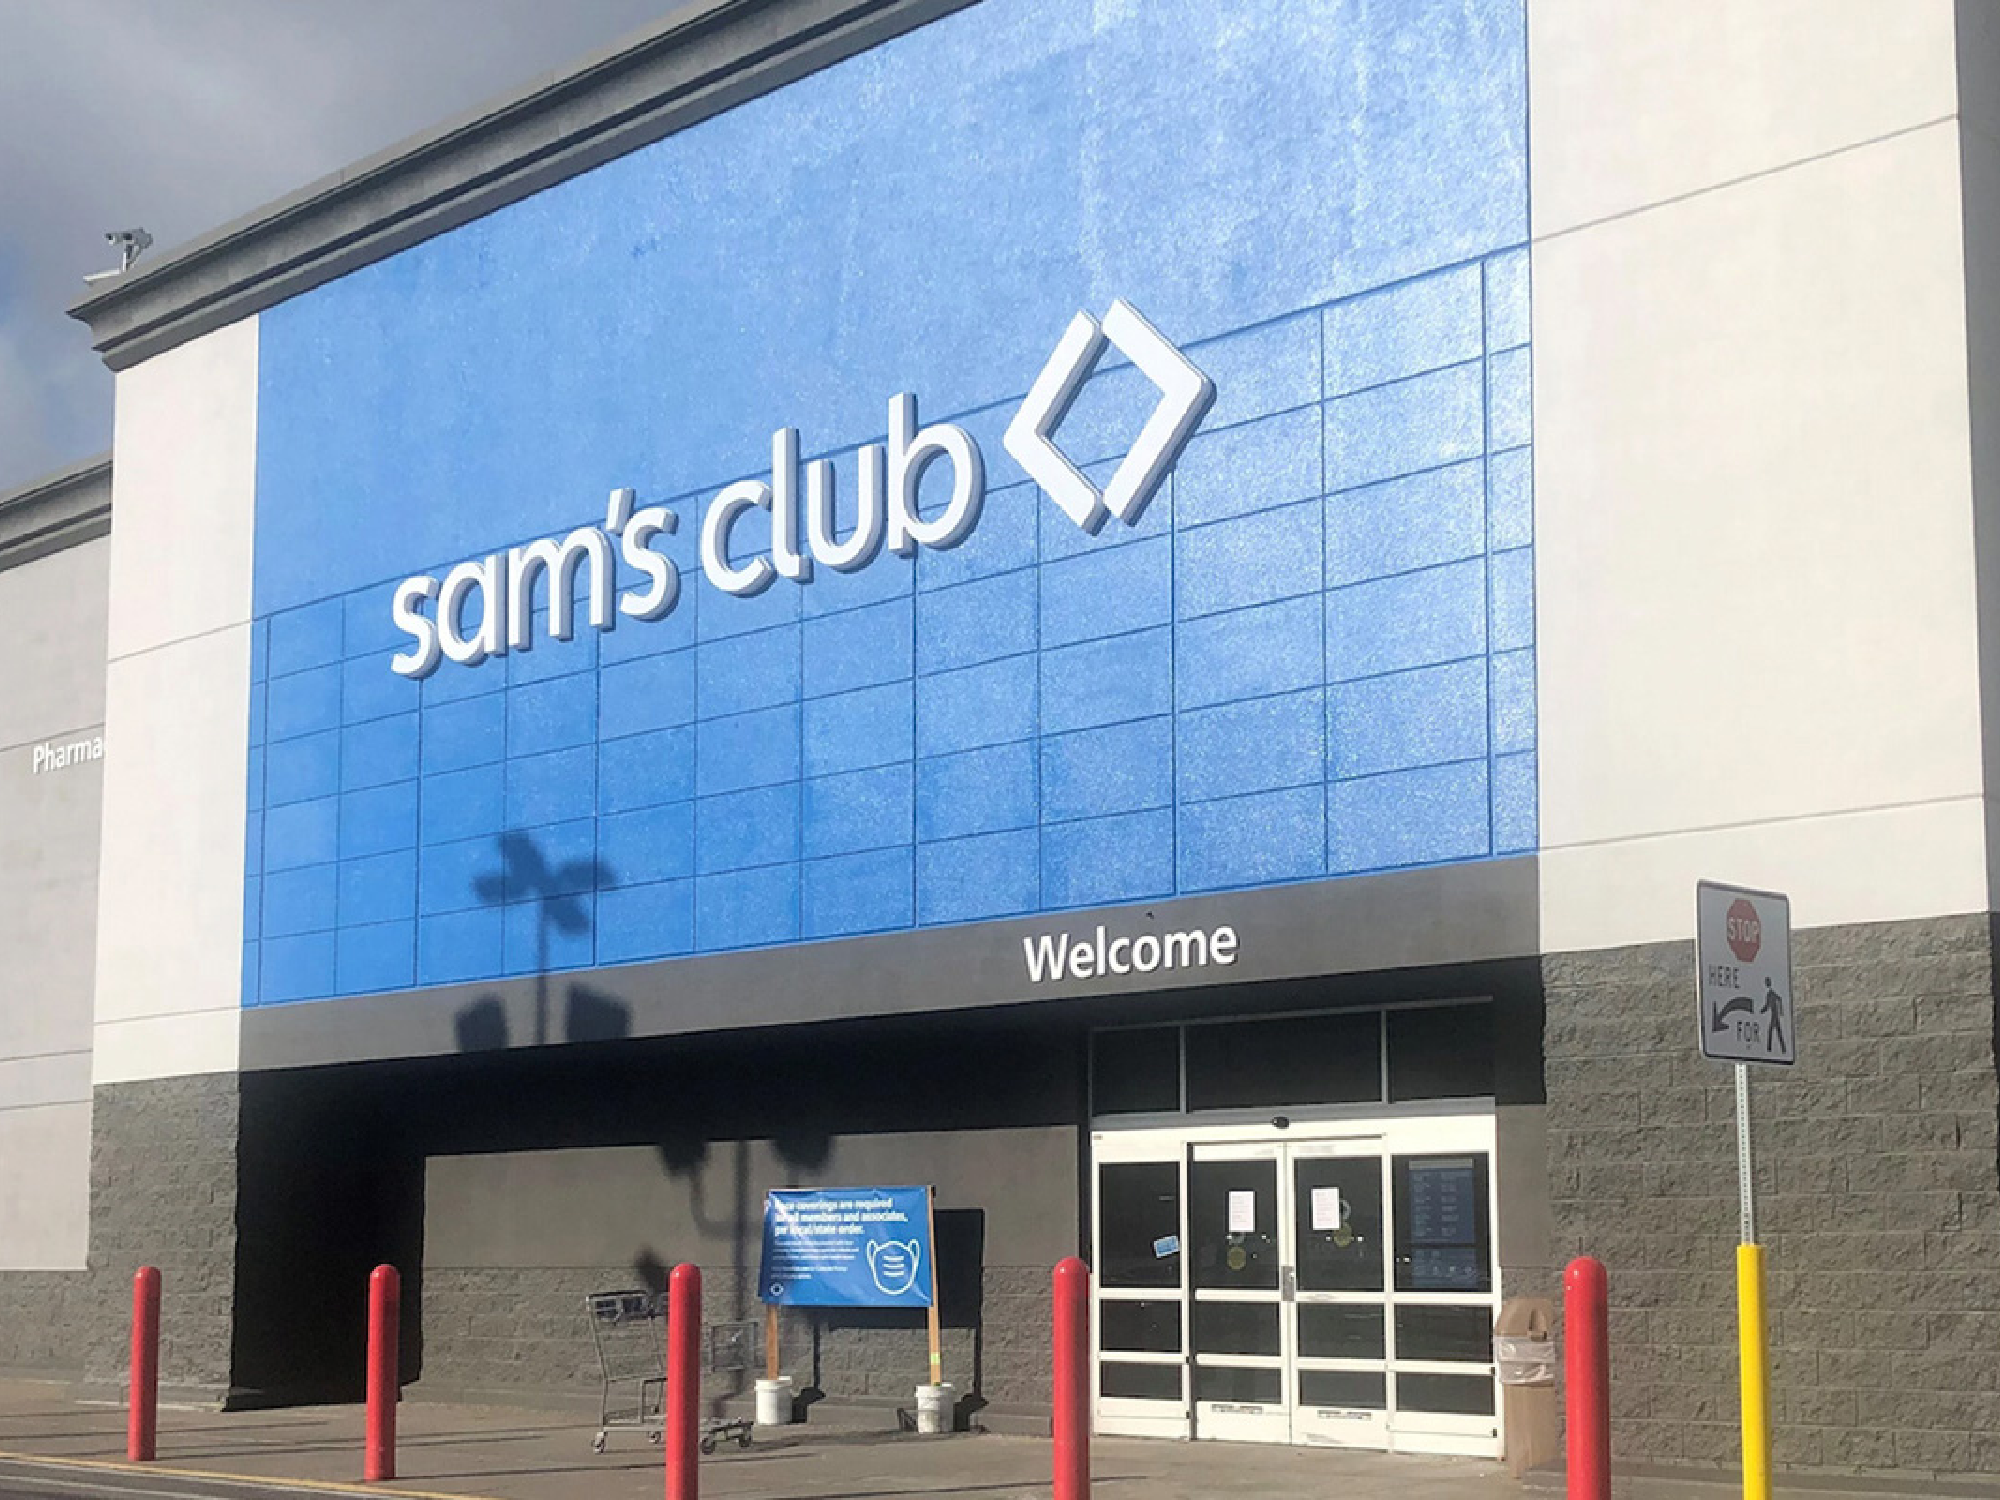 The exterior of a Sam's Club in the daylight.